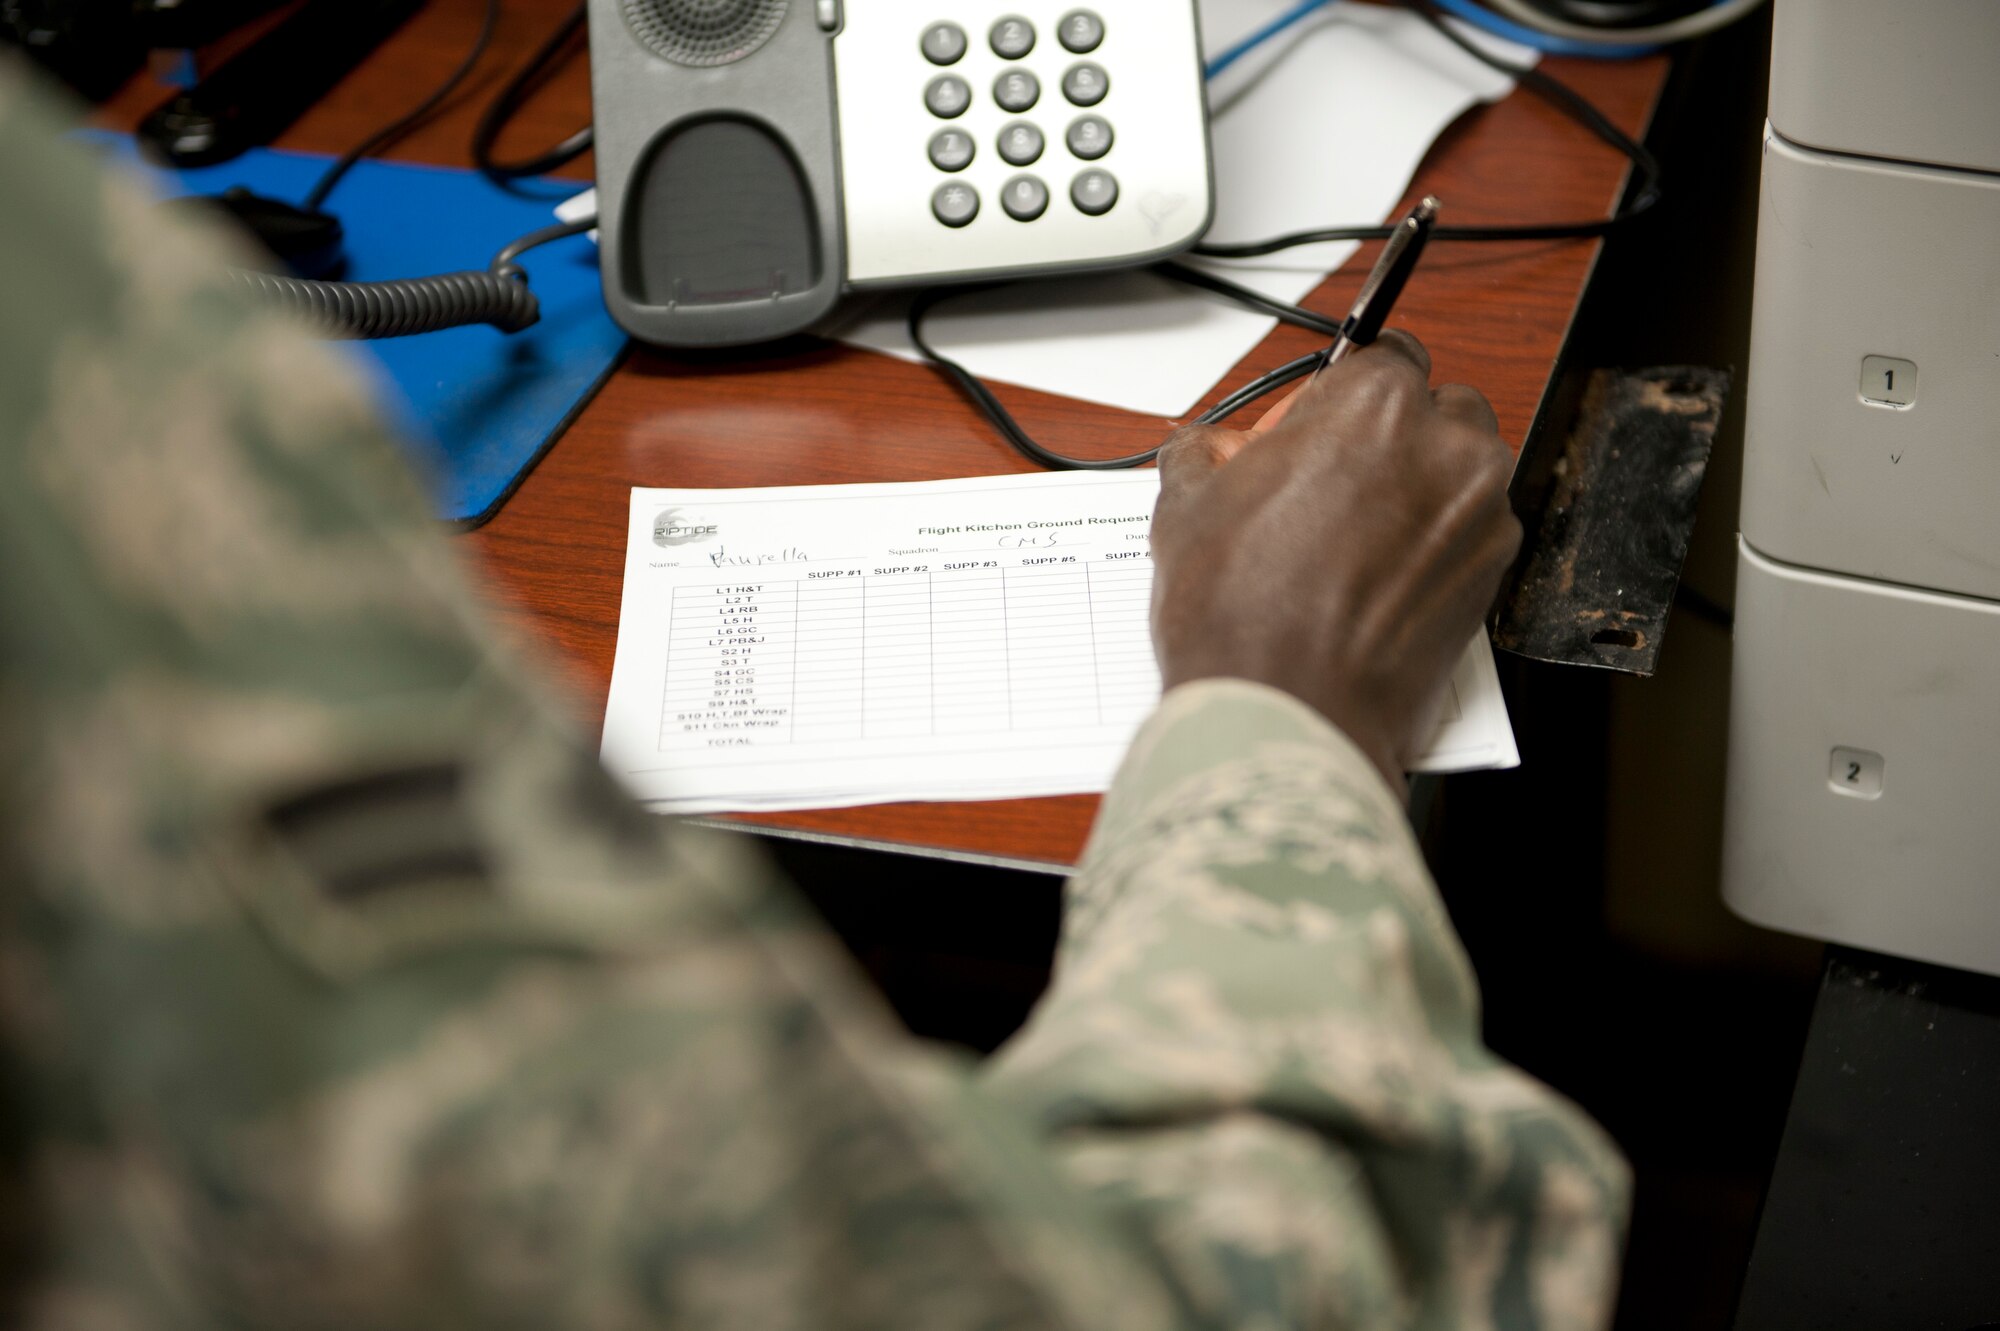 Airman 1st Class Cheikh Dieng, 1st Special Operations Force Support Squadron food service apprentice, takes an order at the Riptide Dining Facility on Hurlburt Field, Fla., Feb. 6, 2014. Airmen can place orders via phone or fax. (U.S. Air Force photo/Senior Airman Krystal M. Garrett)